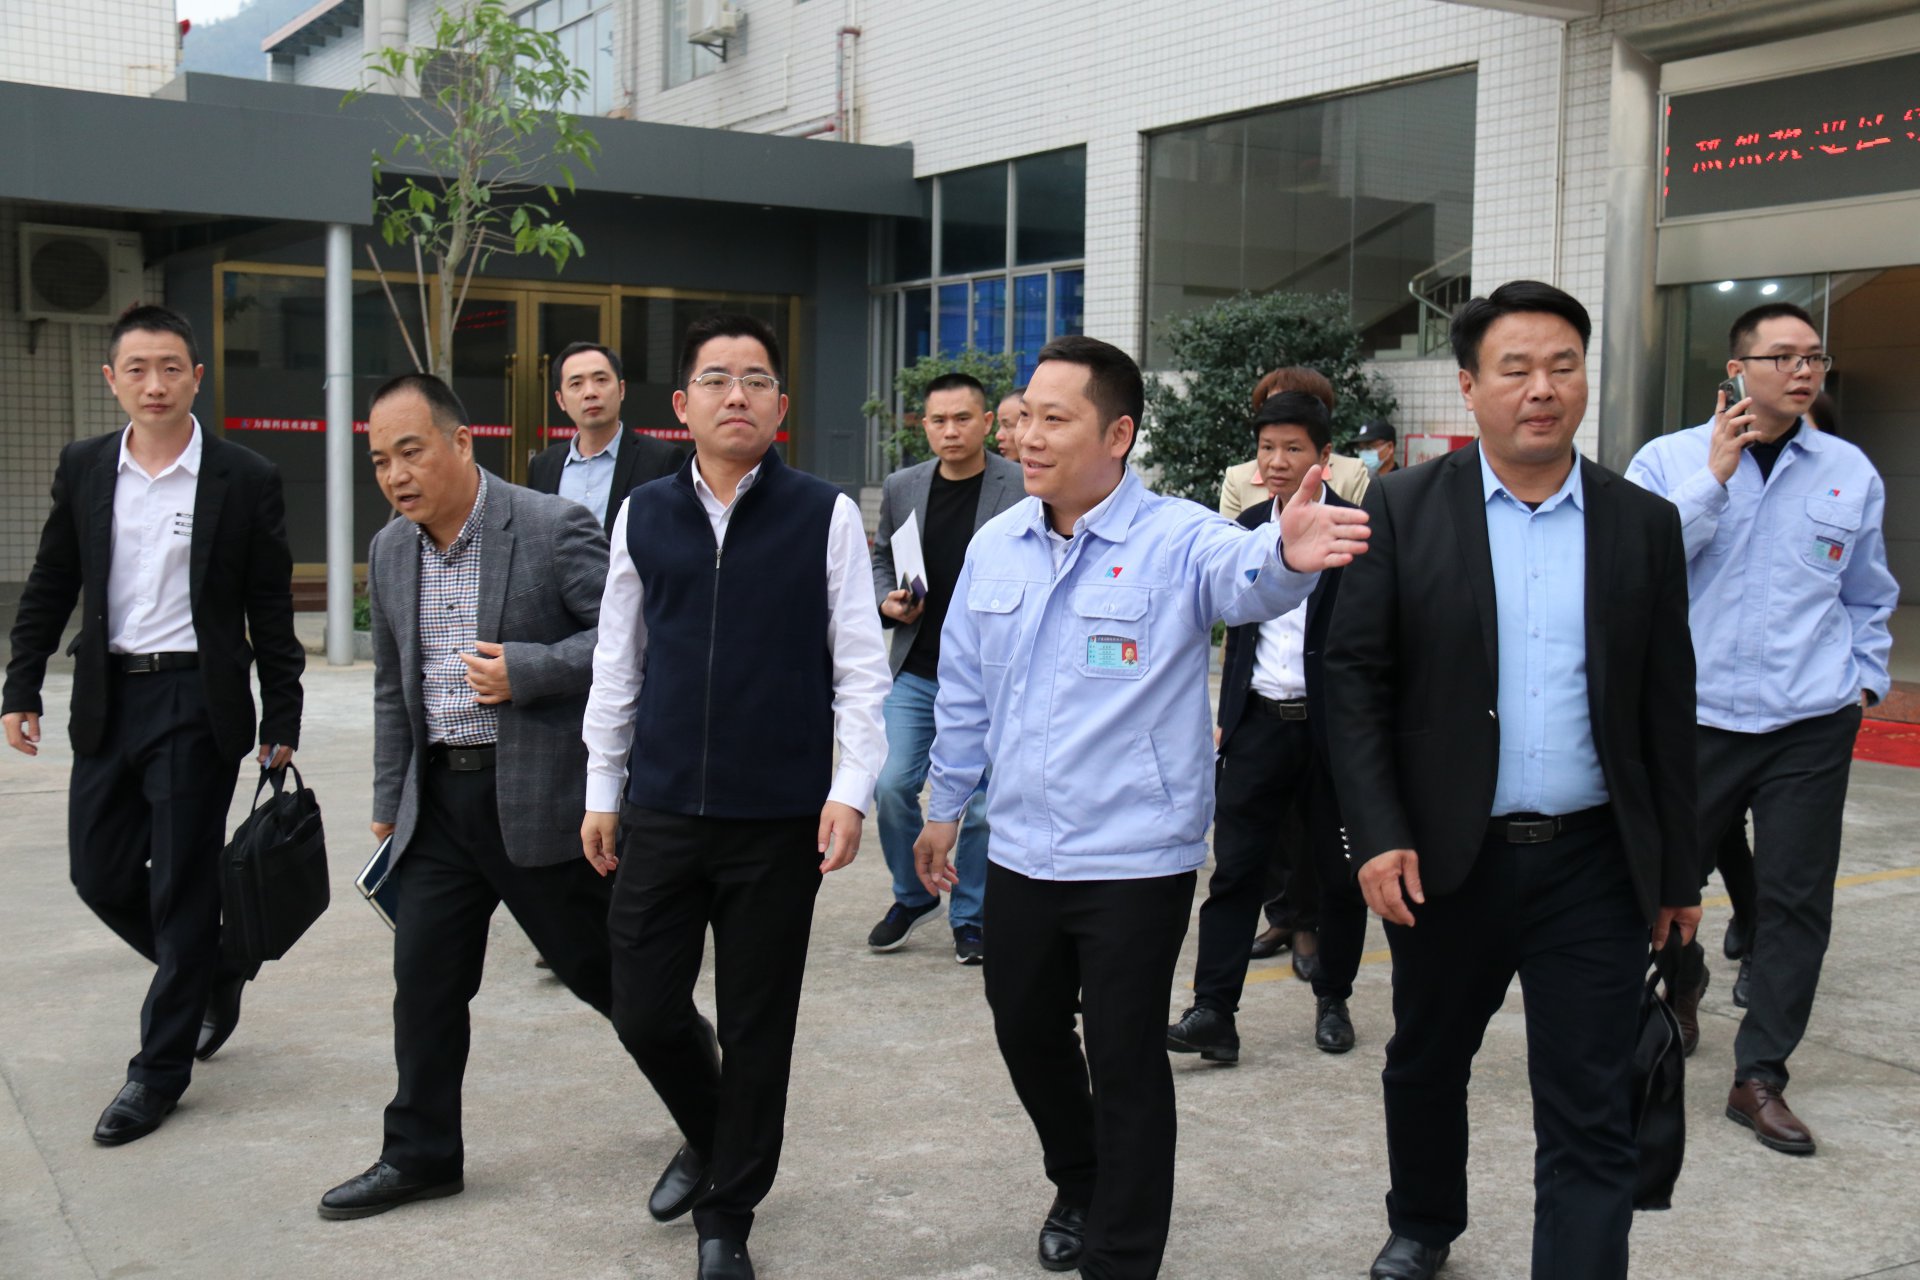 Leaders of Gaoyao District visit our company for investigation